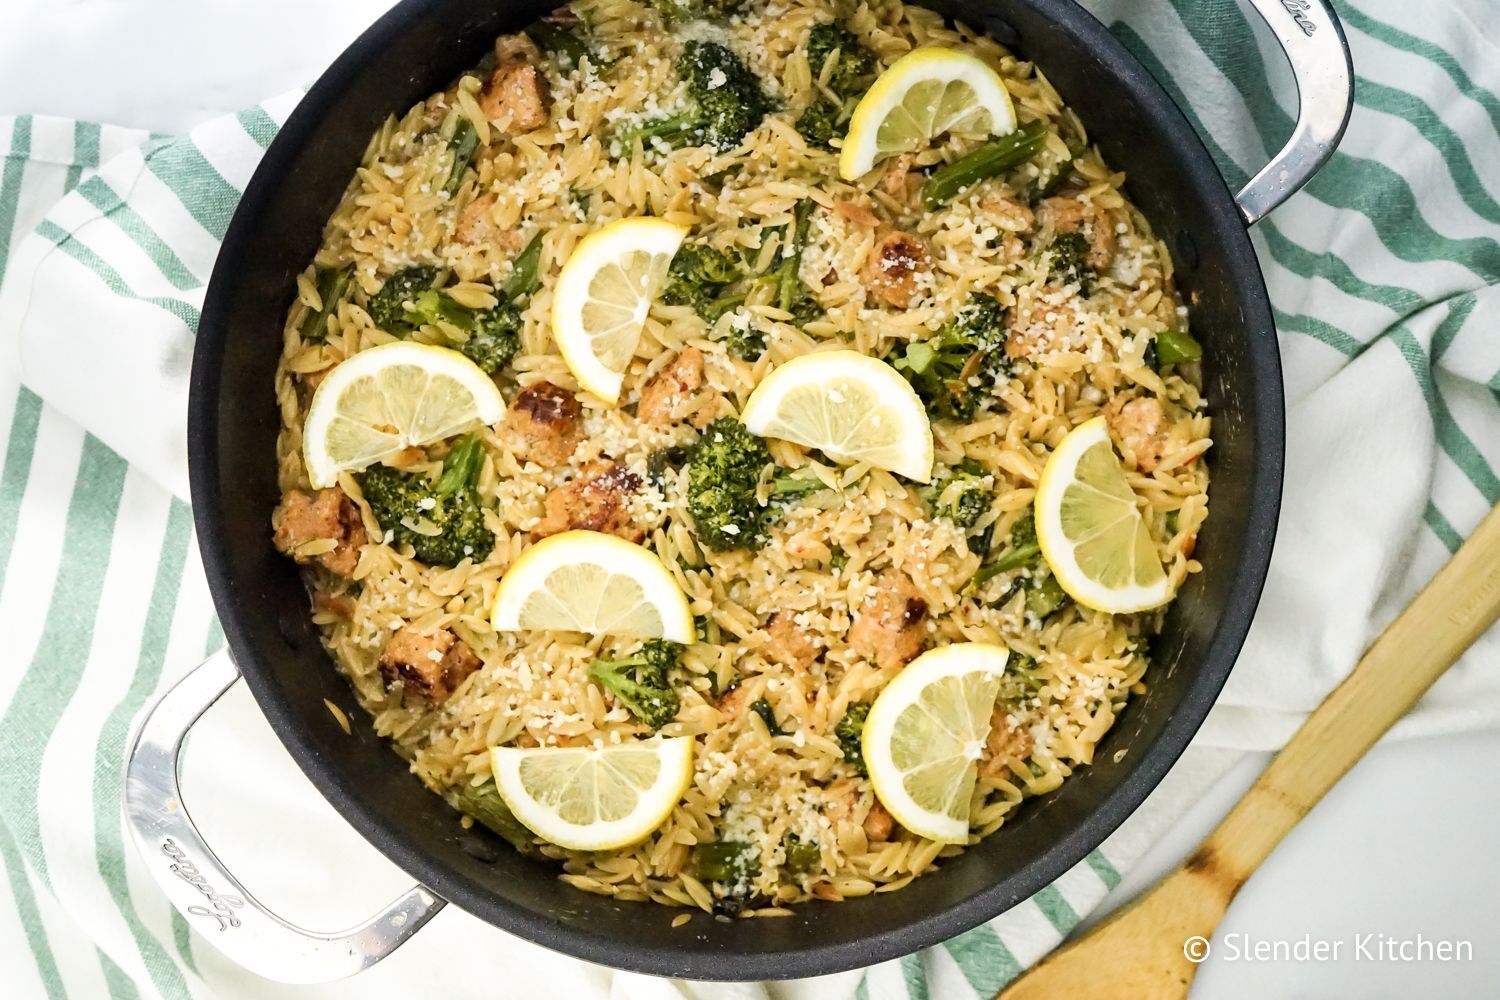 Lemon orzo cooked with chicken sausage and broccoli in a skillet.